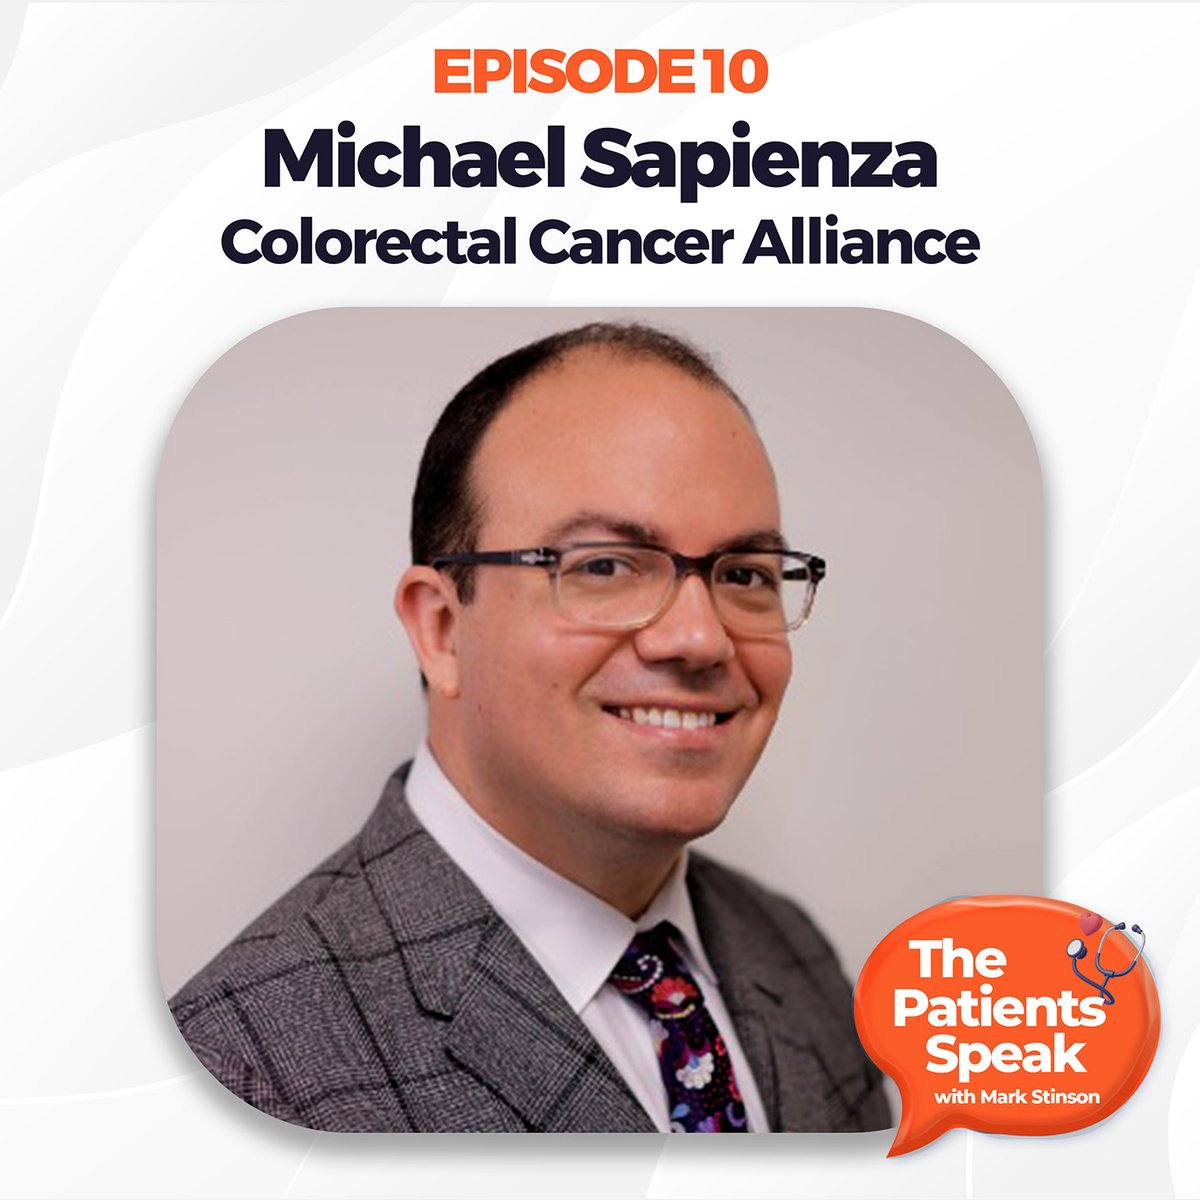 Our CEO @coloncancermike spoke with @83bar_ about colorectal cancer, the importance of its screening, Alliance support programs, and our @LeadFromBehind launch. Take a listen to hear what Michael wants all colorectal cancer patients to know: bit.ly/ThePatientsSpe…